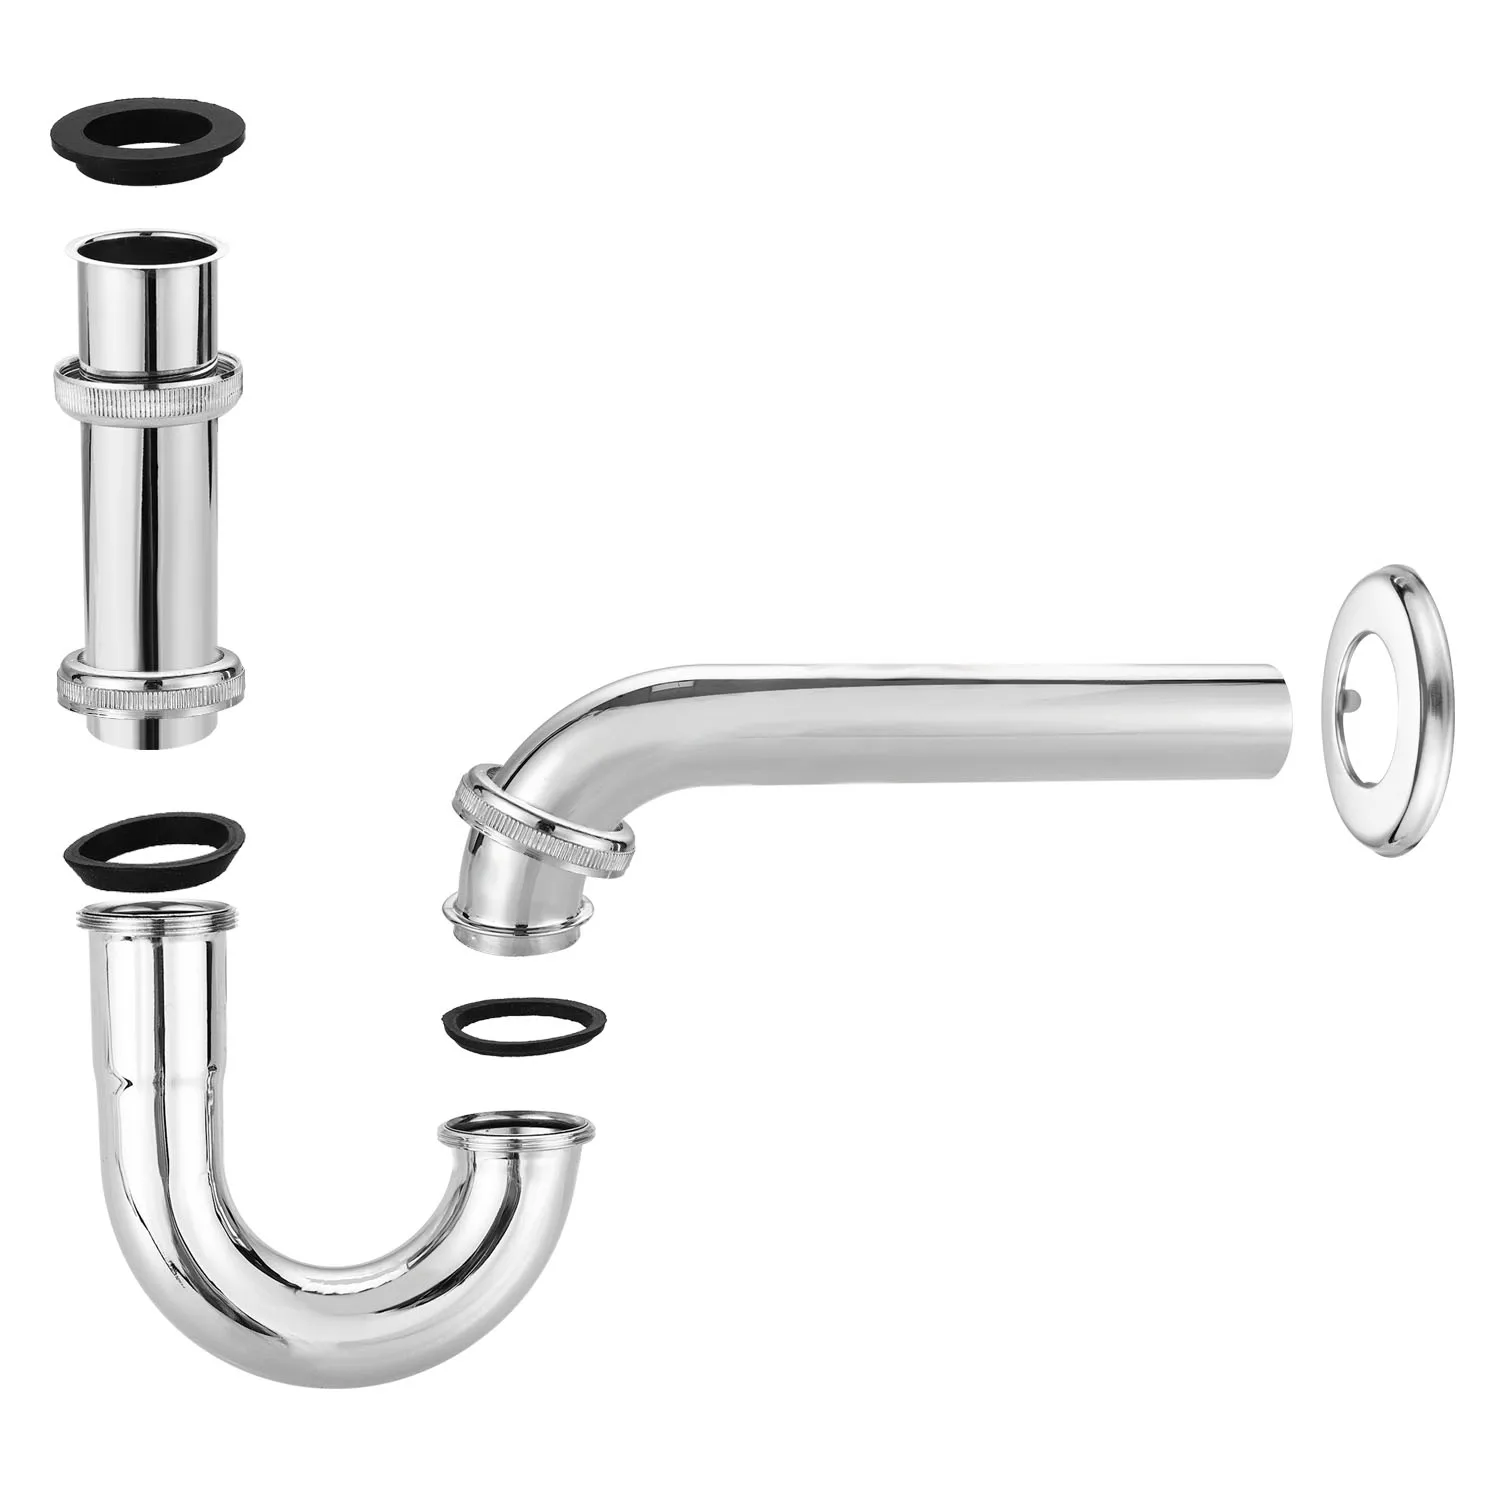 1pc Stainless Steel Waste Drain Valve Siphon 32mm Anti-odor Water Trap For Faucet Sink Drainer Drain Valve Sewer Pipe